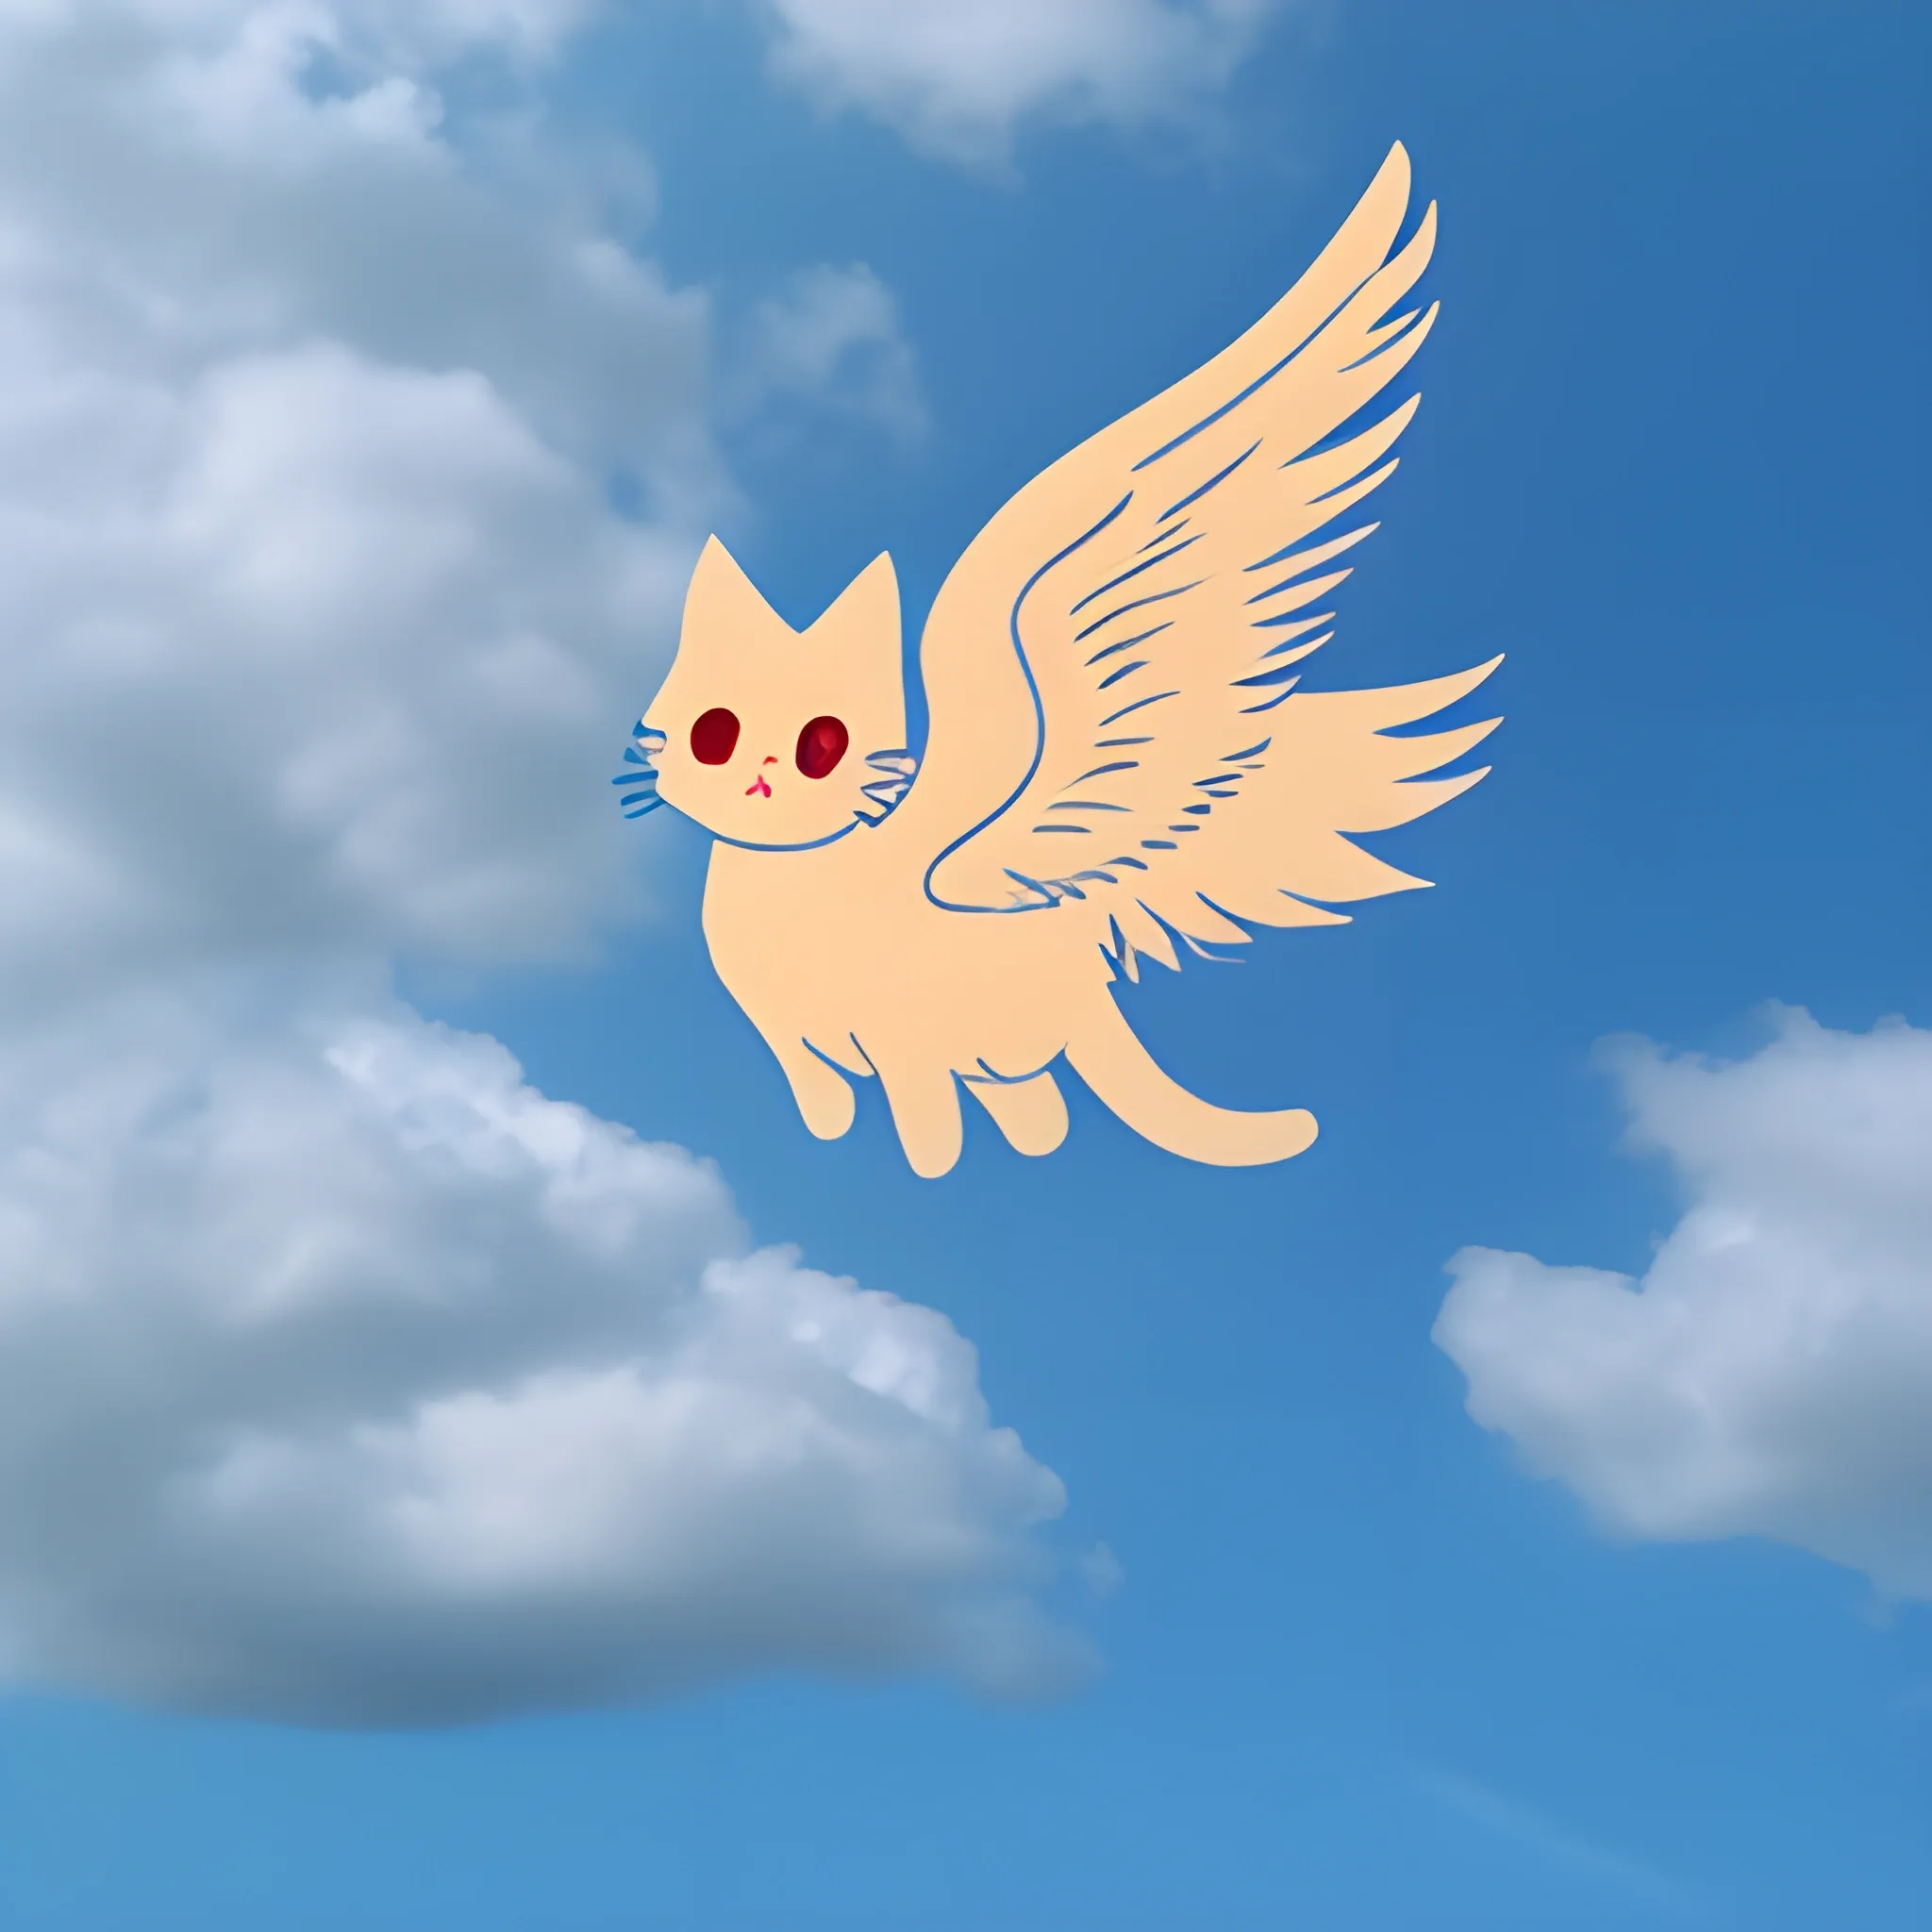 winged cat in the sky
